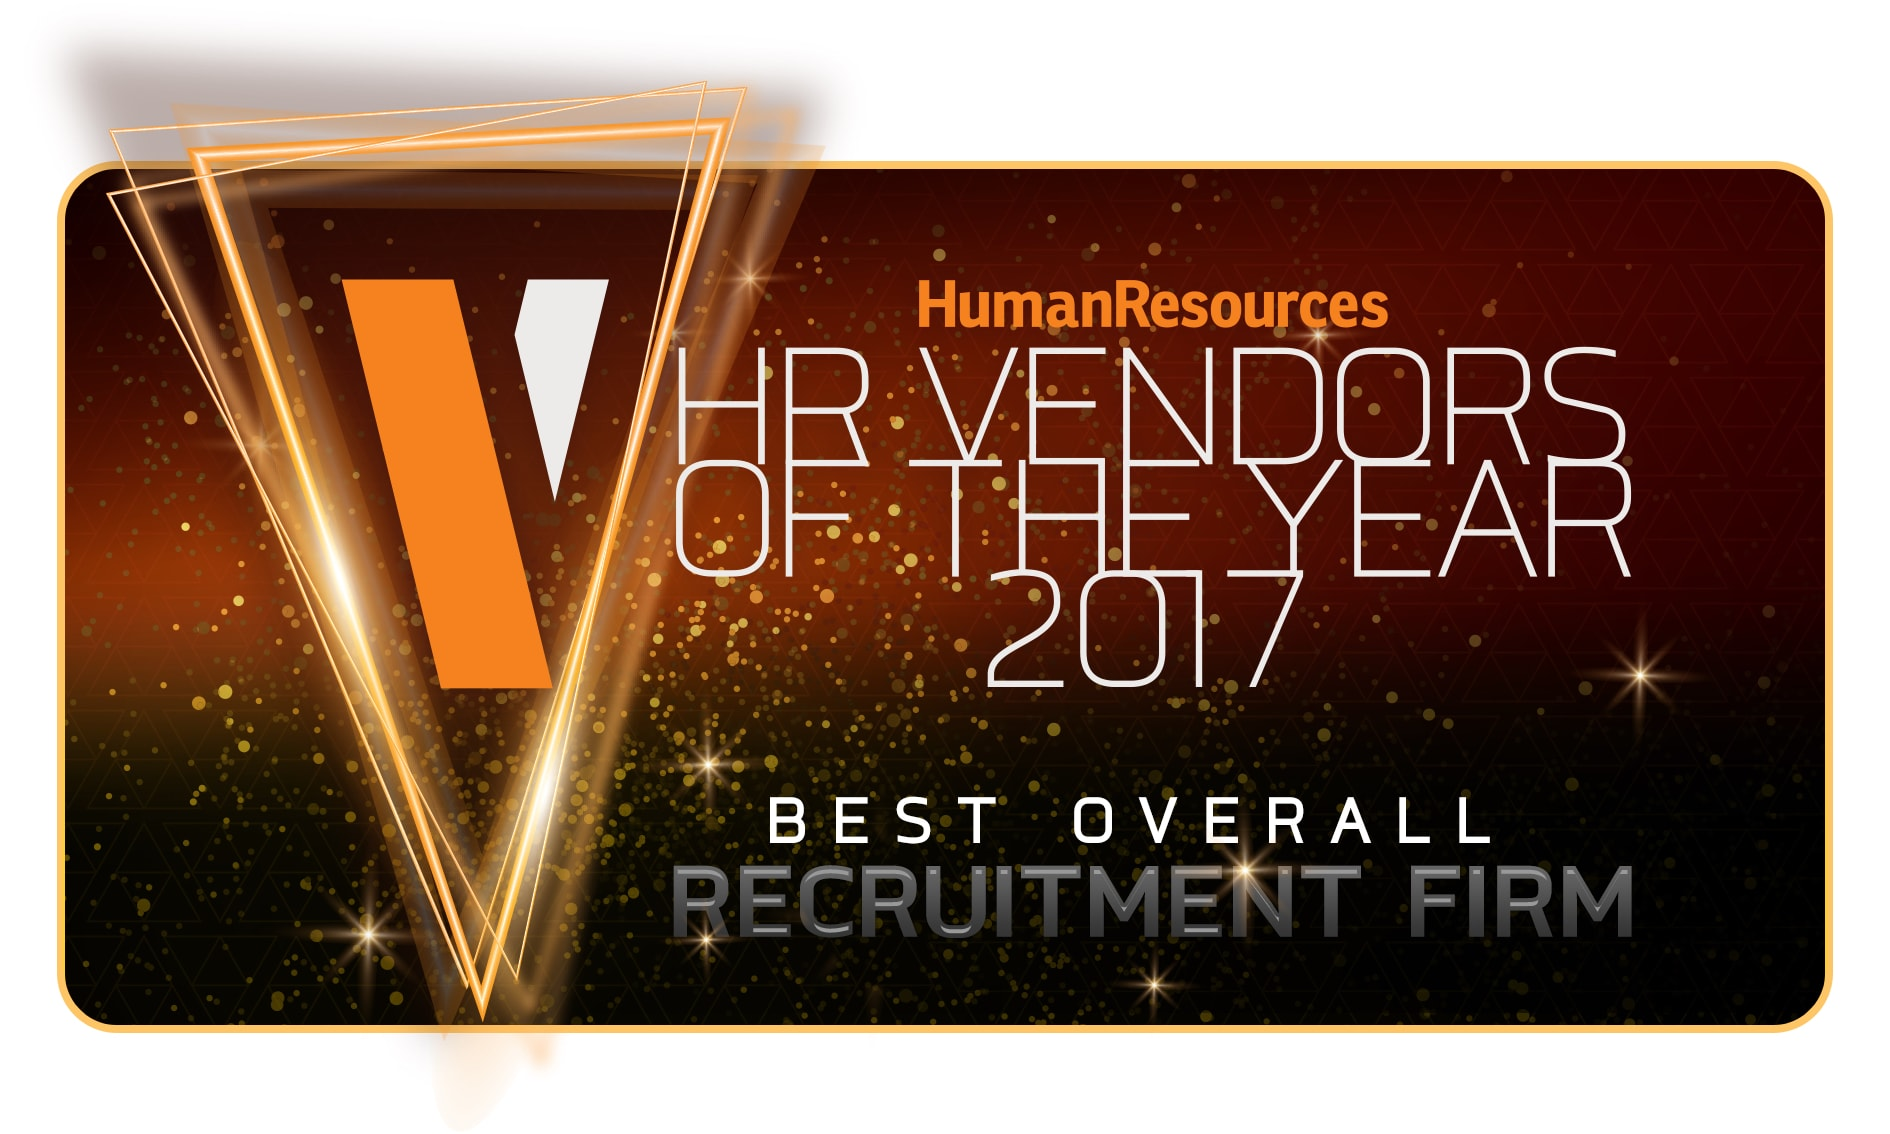 HR Vendors of the Year 2017